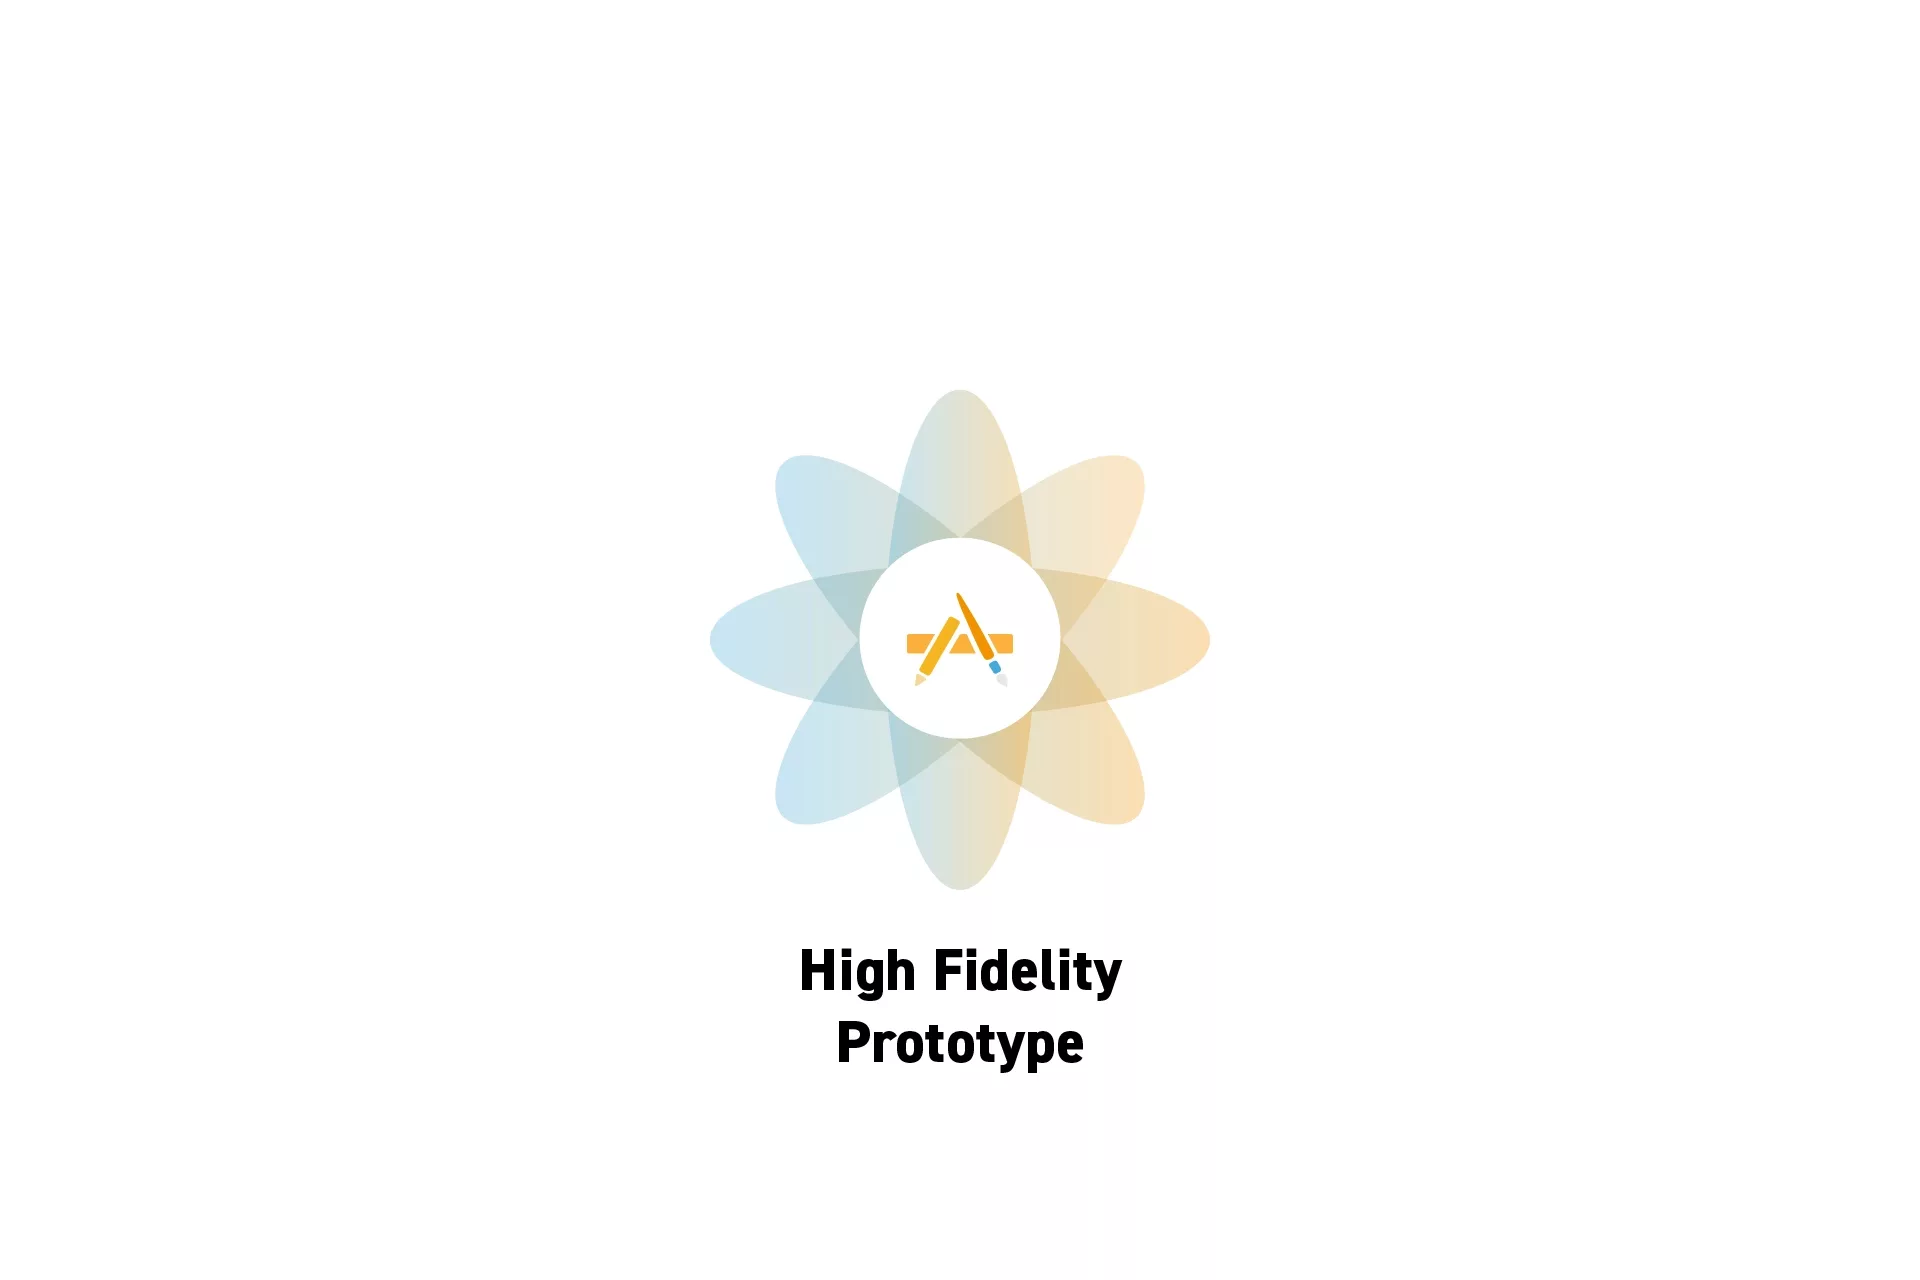 A flower that represents Digital Craft with the text “High Fidelity Prototype” beneath it.